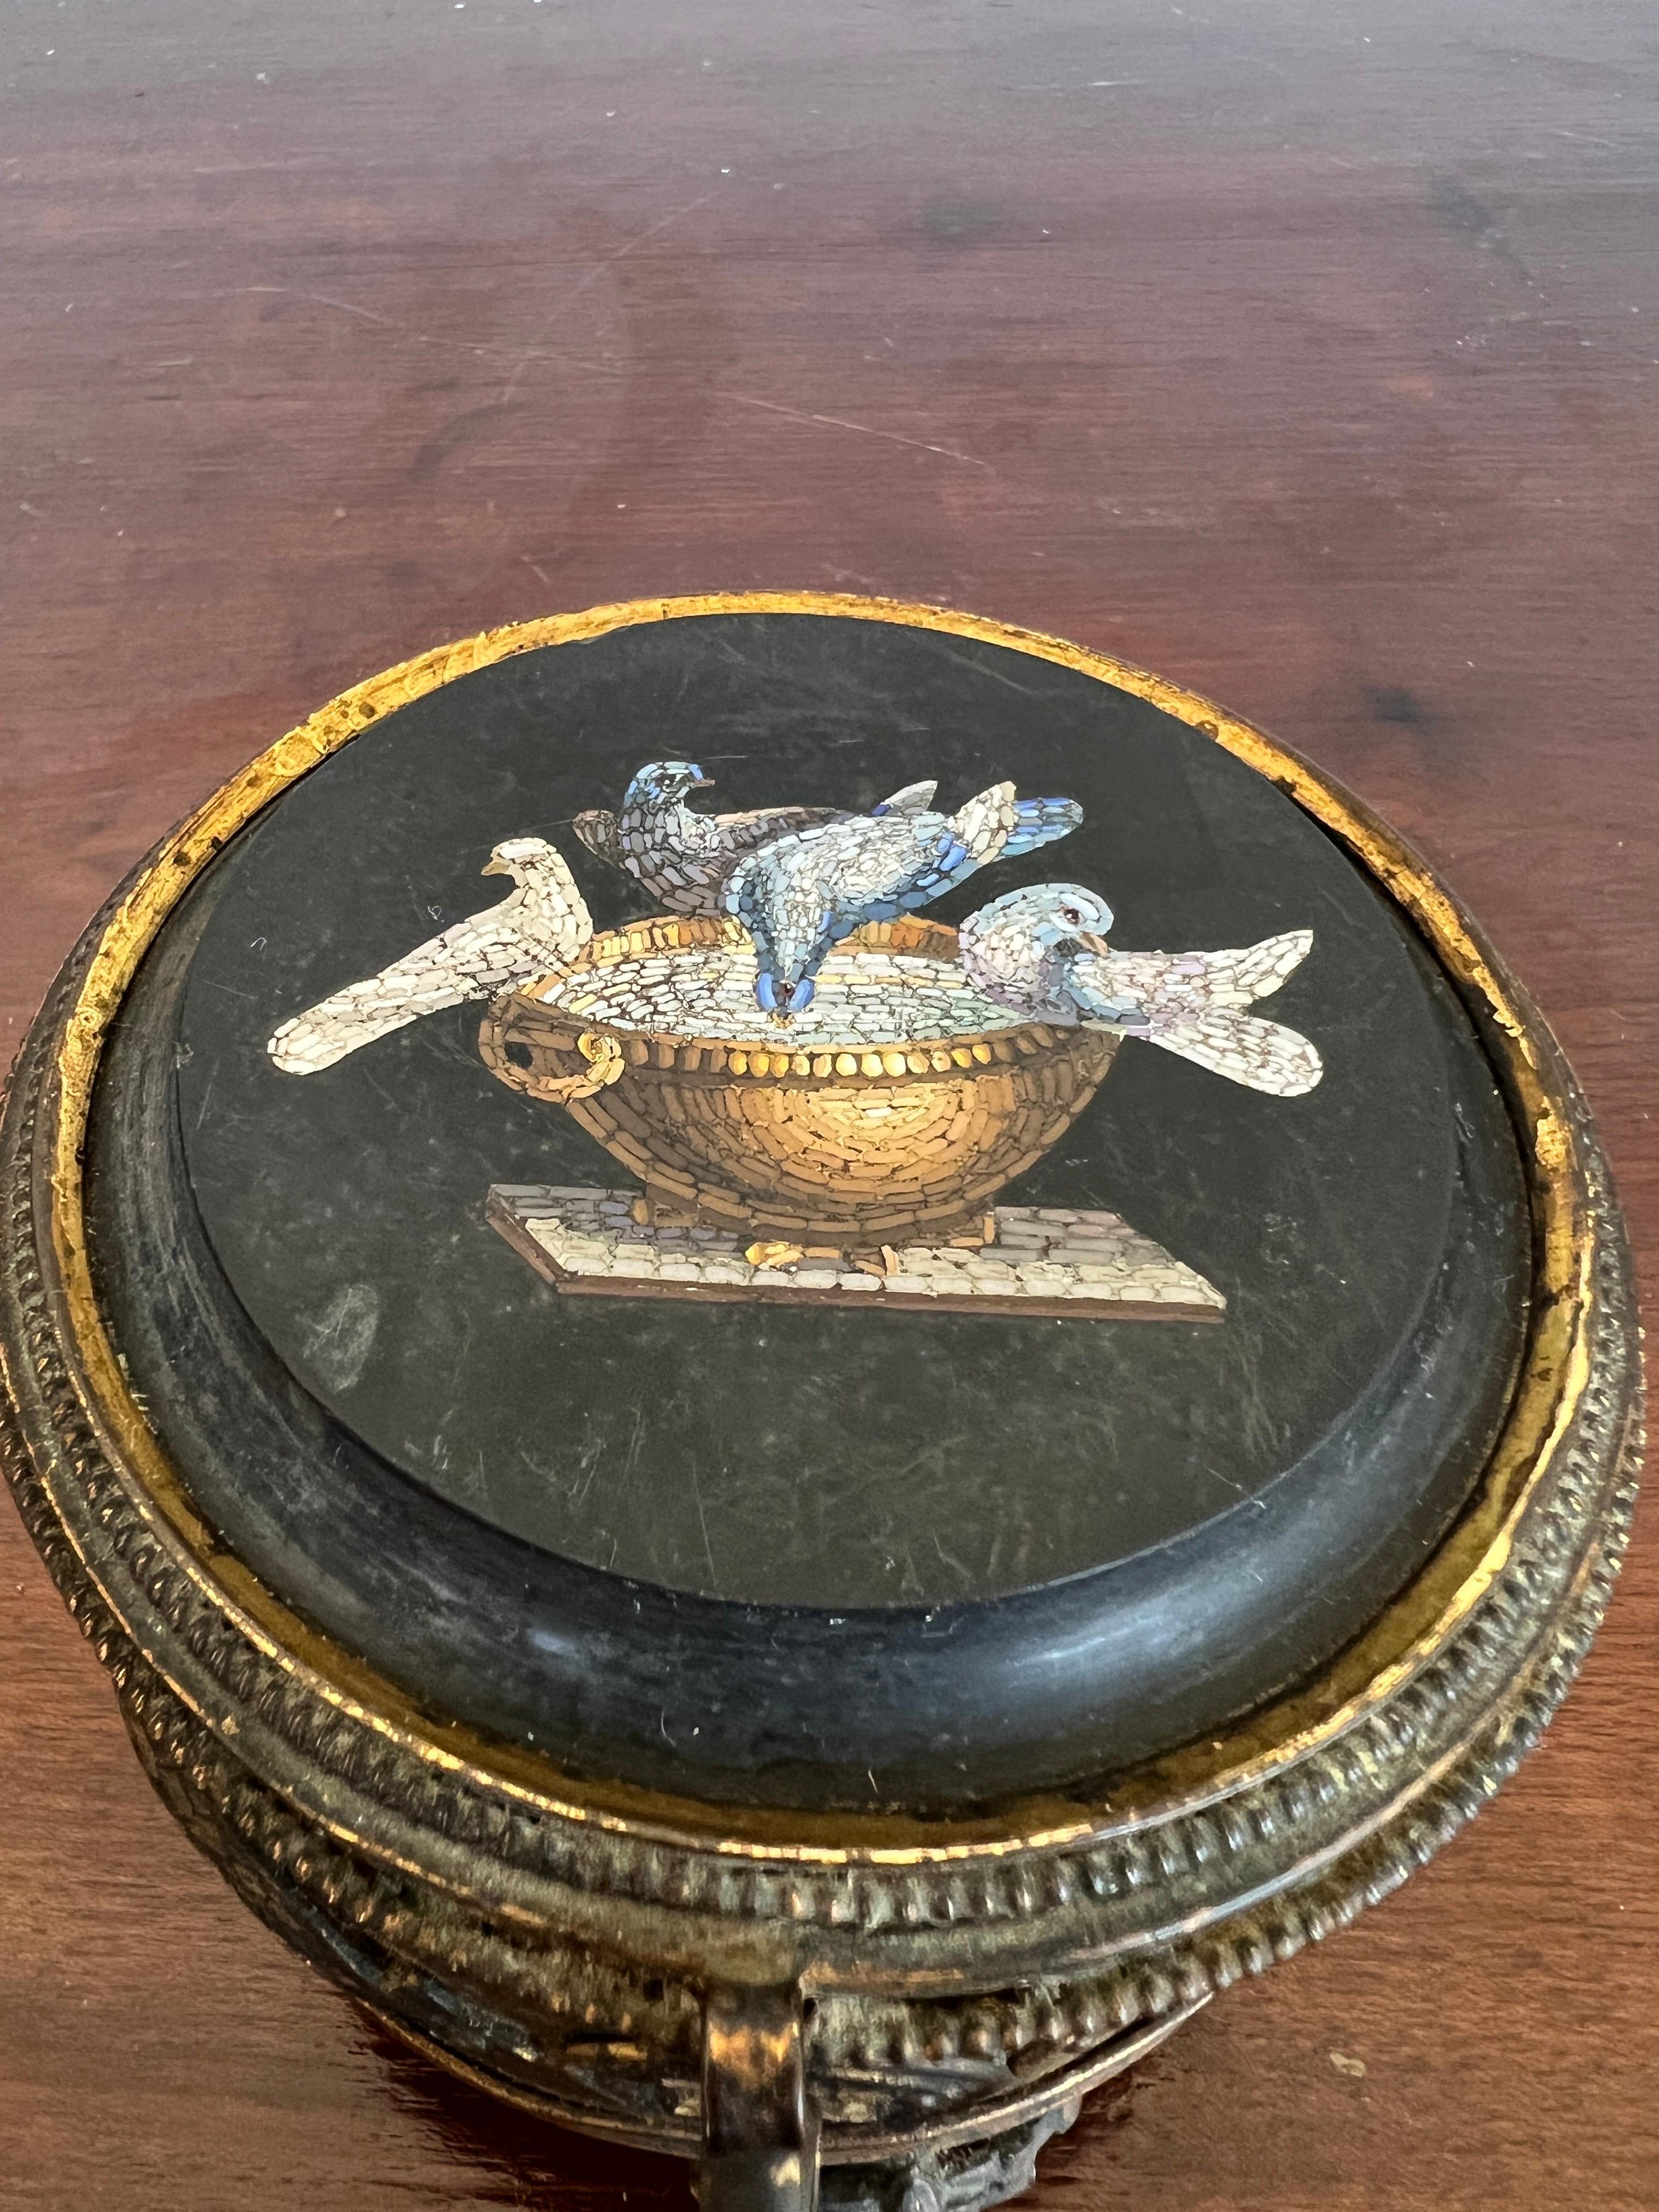 Italian, likely Circa 1880.

This beautiful box has an exceptional Grand Tour Micro-mosaic plaque depicting the Capitoline Doves or Doves of Pliny after the Roman antiquity. Also by legendary maker Giacomo Raffaelli. 

